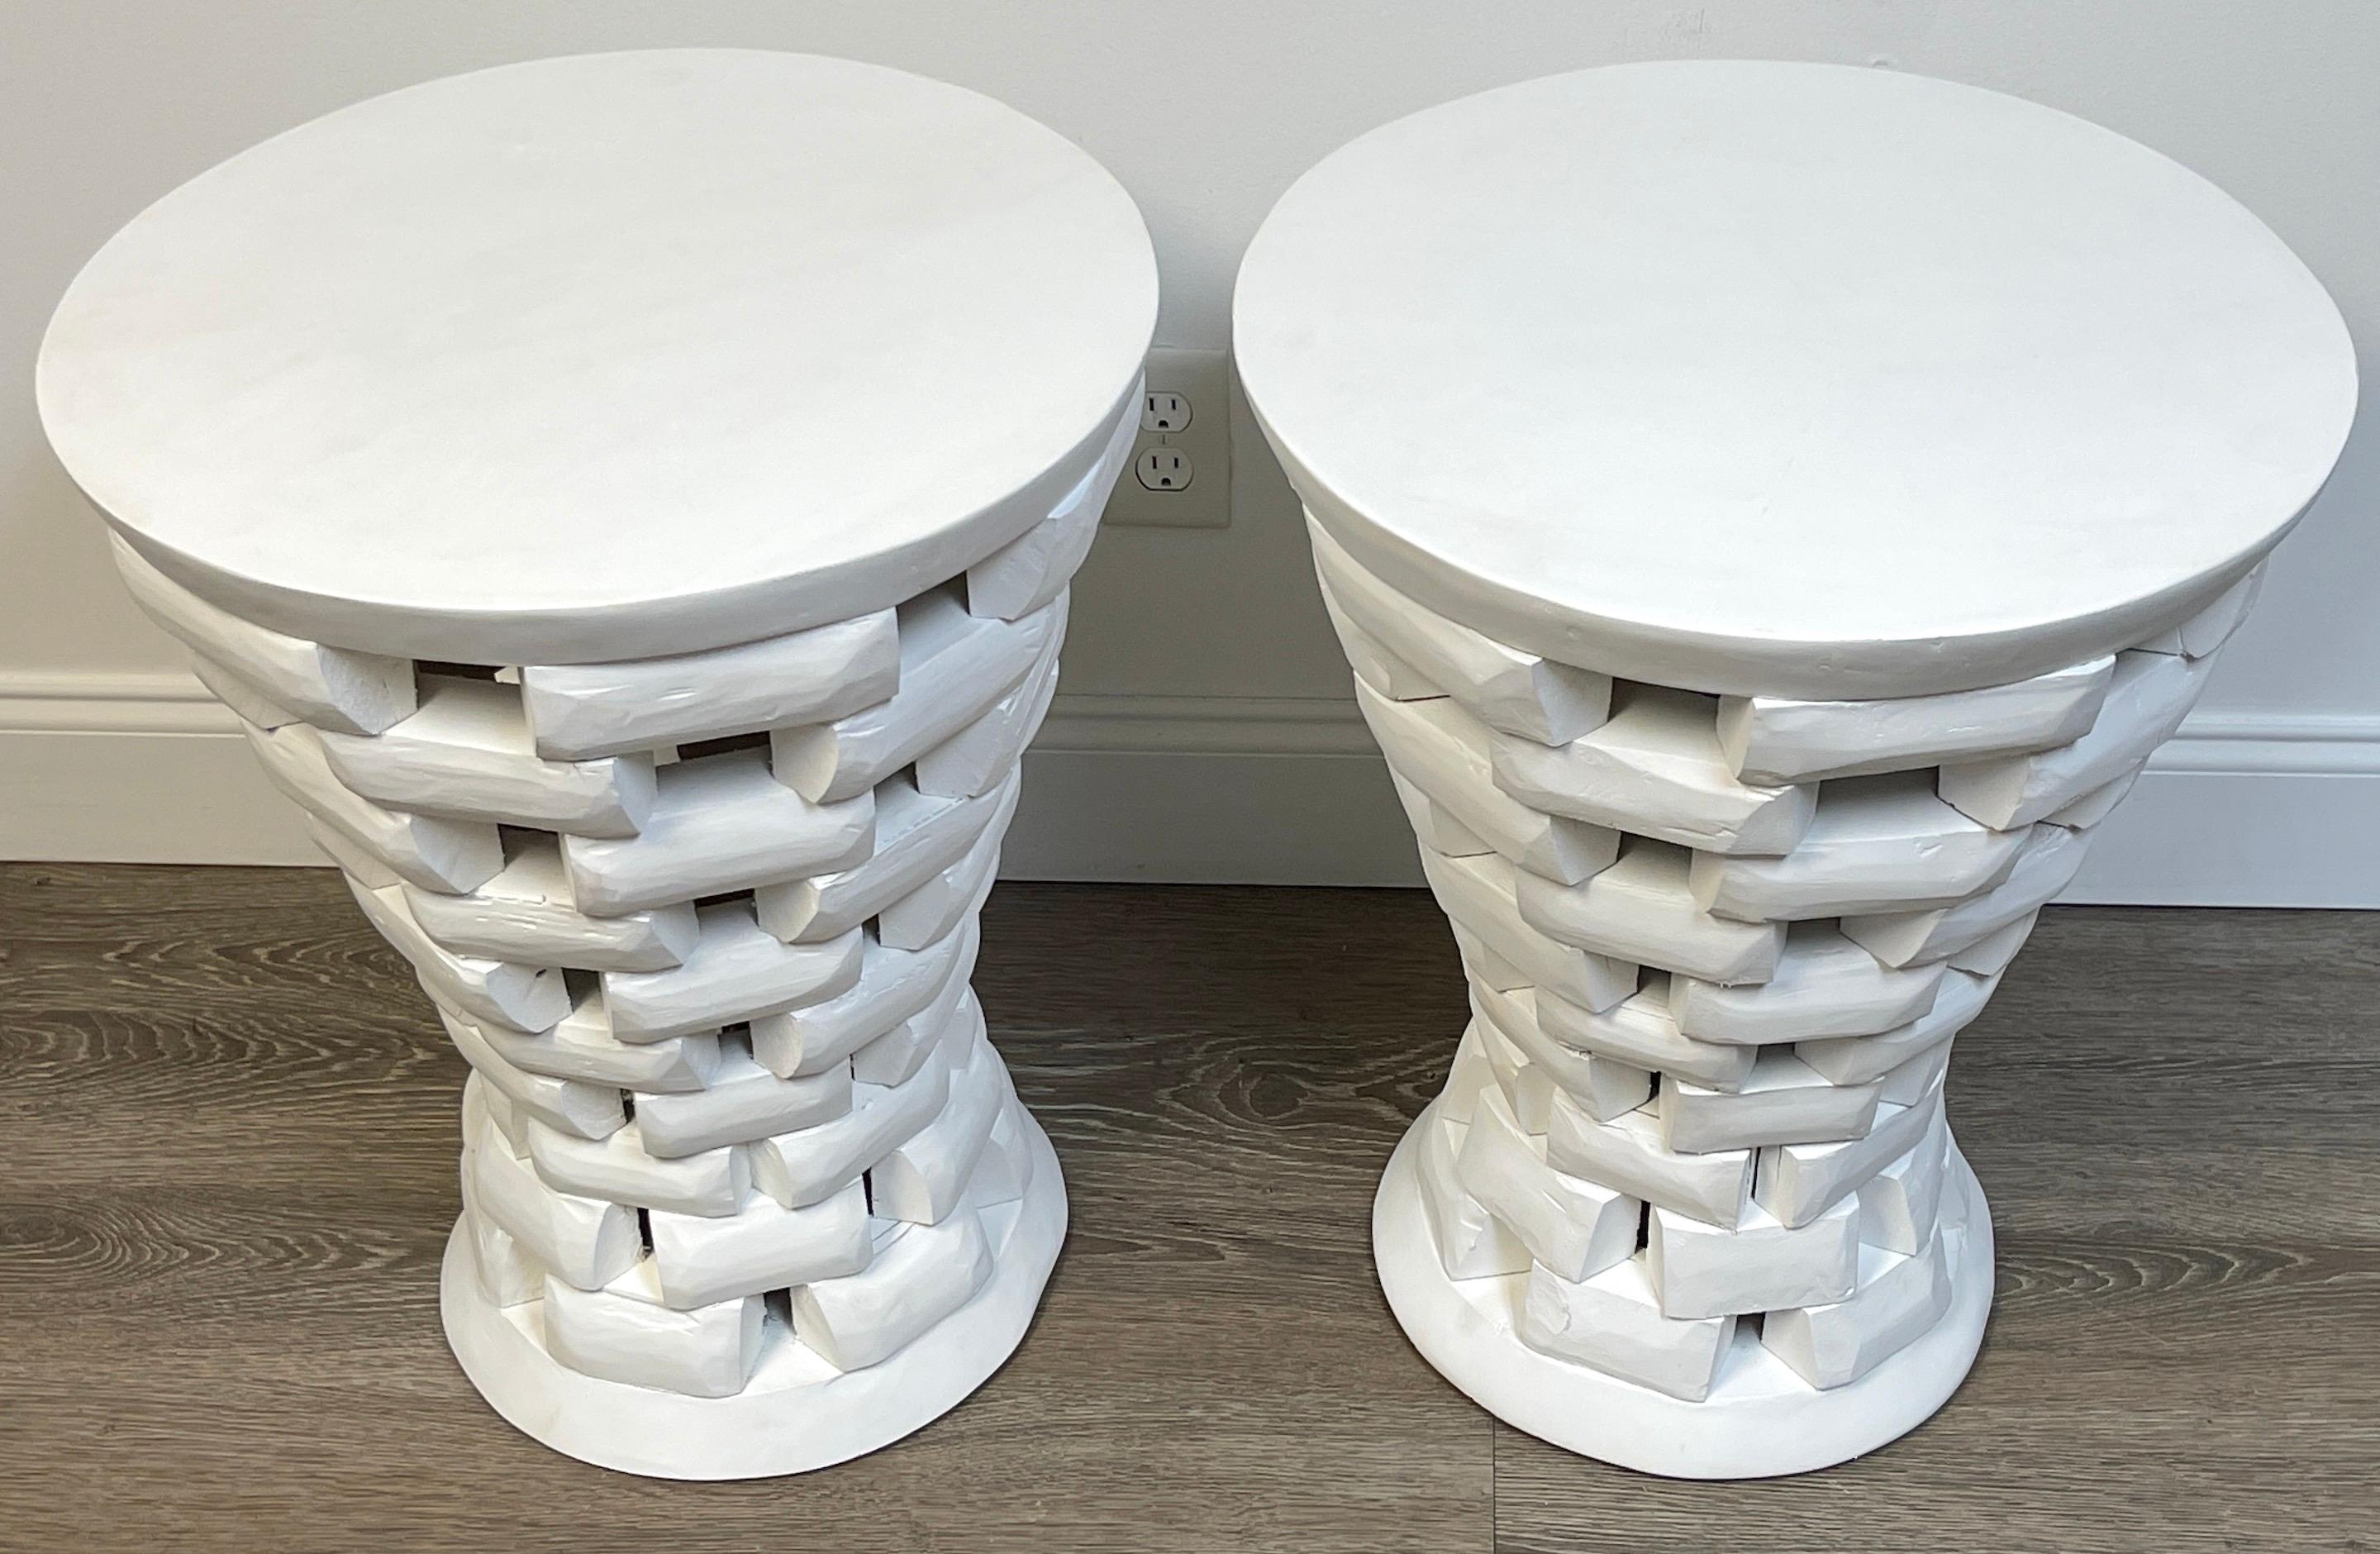 Pair of African style carved teak pedestal side tables, in white
A fine pair of modern hand carved teak pedestal side tables, each one with a 19.5-Inch diameter raised on continuous descending 10 brick high column, resting on 12-Inch diameter base.